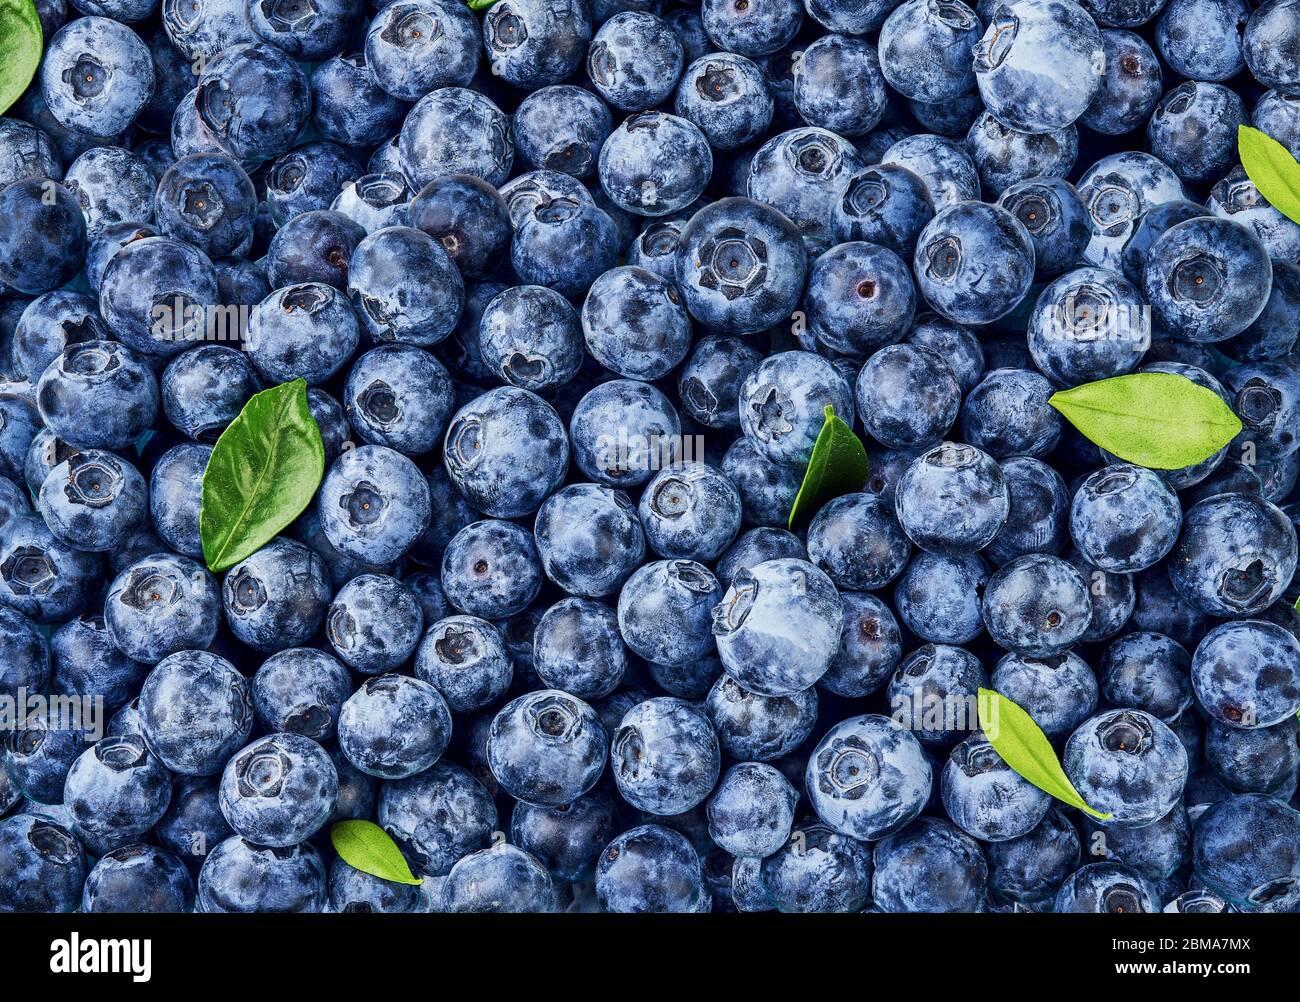 Fresh blueberry background. Blueberry leaves with berries. Top view. Concept of healthy and dieting eating. Blue texture of blueberries. Stock Photo